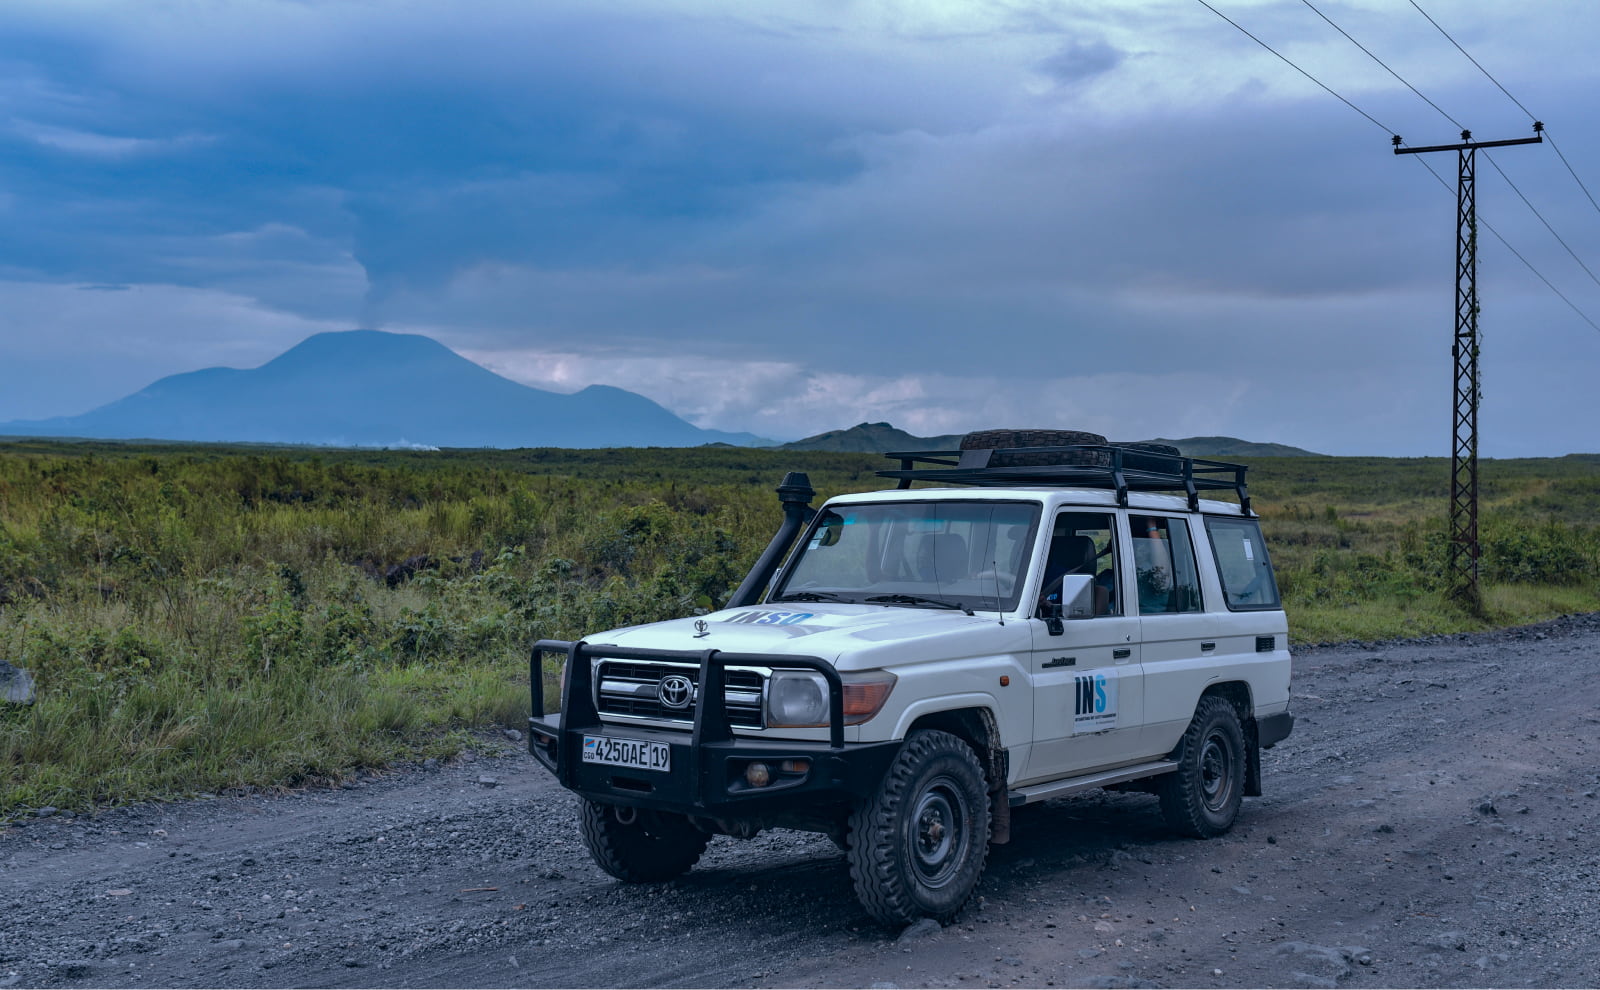 INSO's car outside of Sake, DRC with a volcano in the background. Credit: O. Acland/INSO